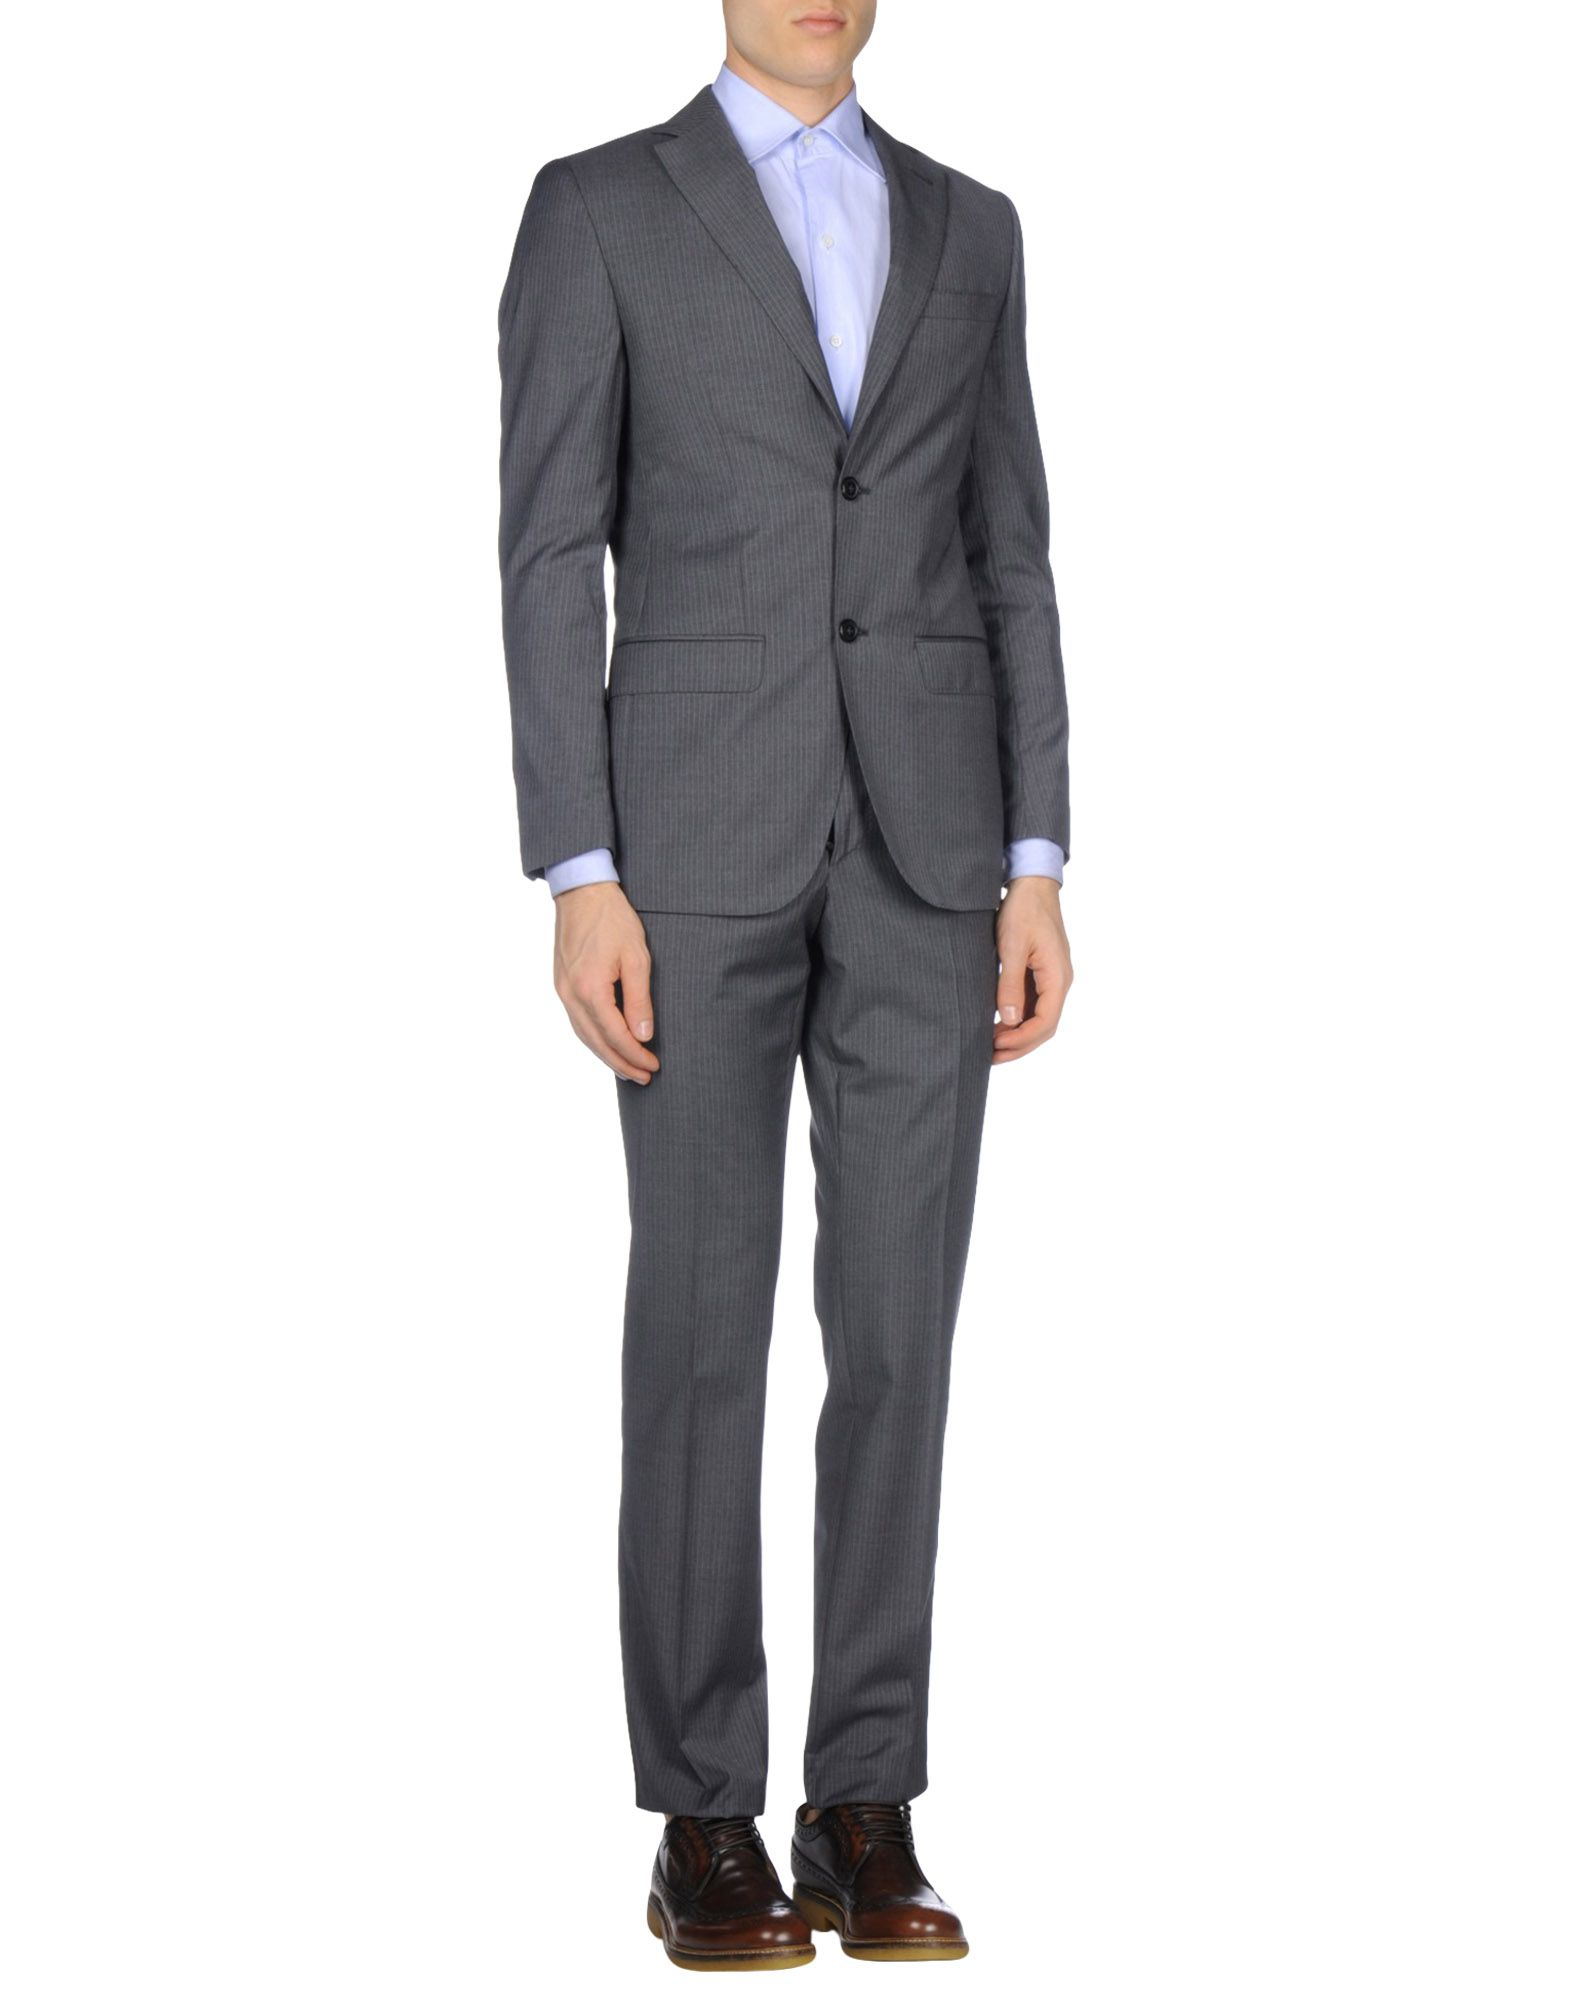 Lyst - Valentino Roma Suit in Gray for Men